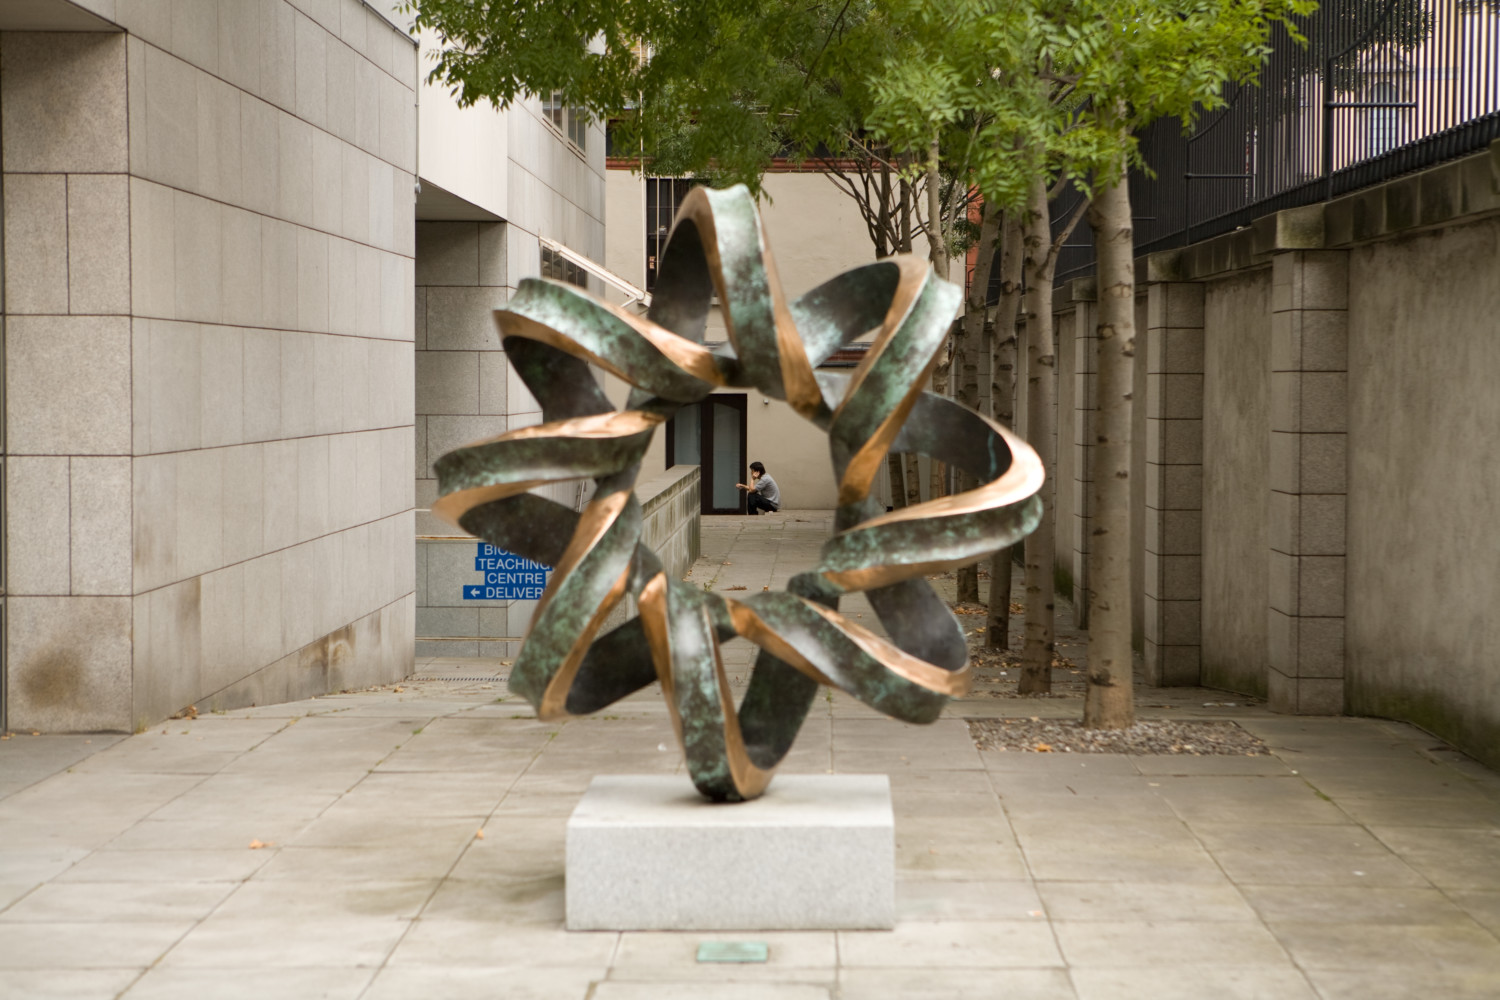 The sculpture of "The Double Helix" by Brian King stands outside the Smurfit Institute of Genetics at Trinity College Dublin.